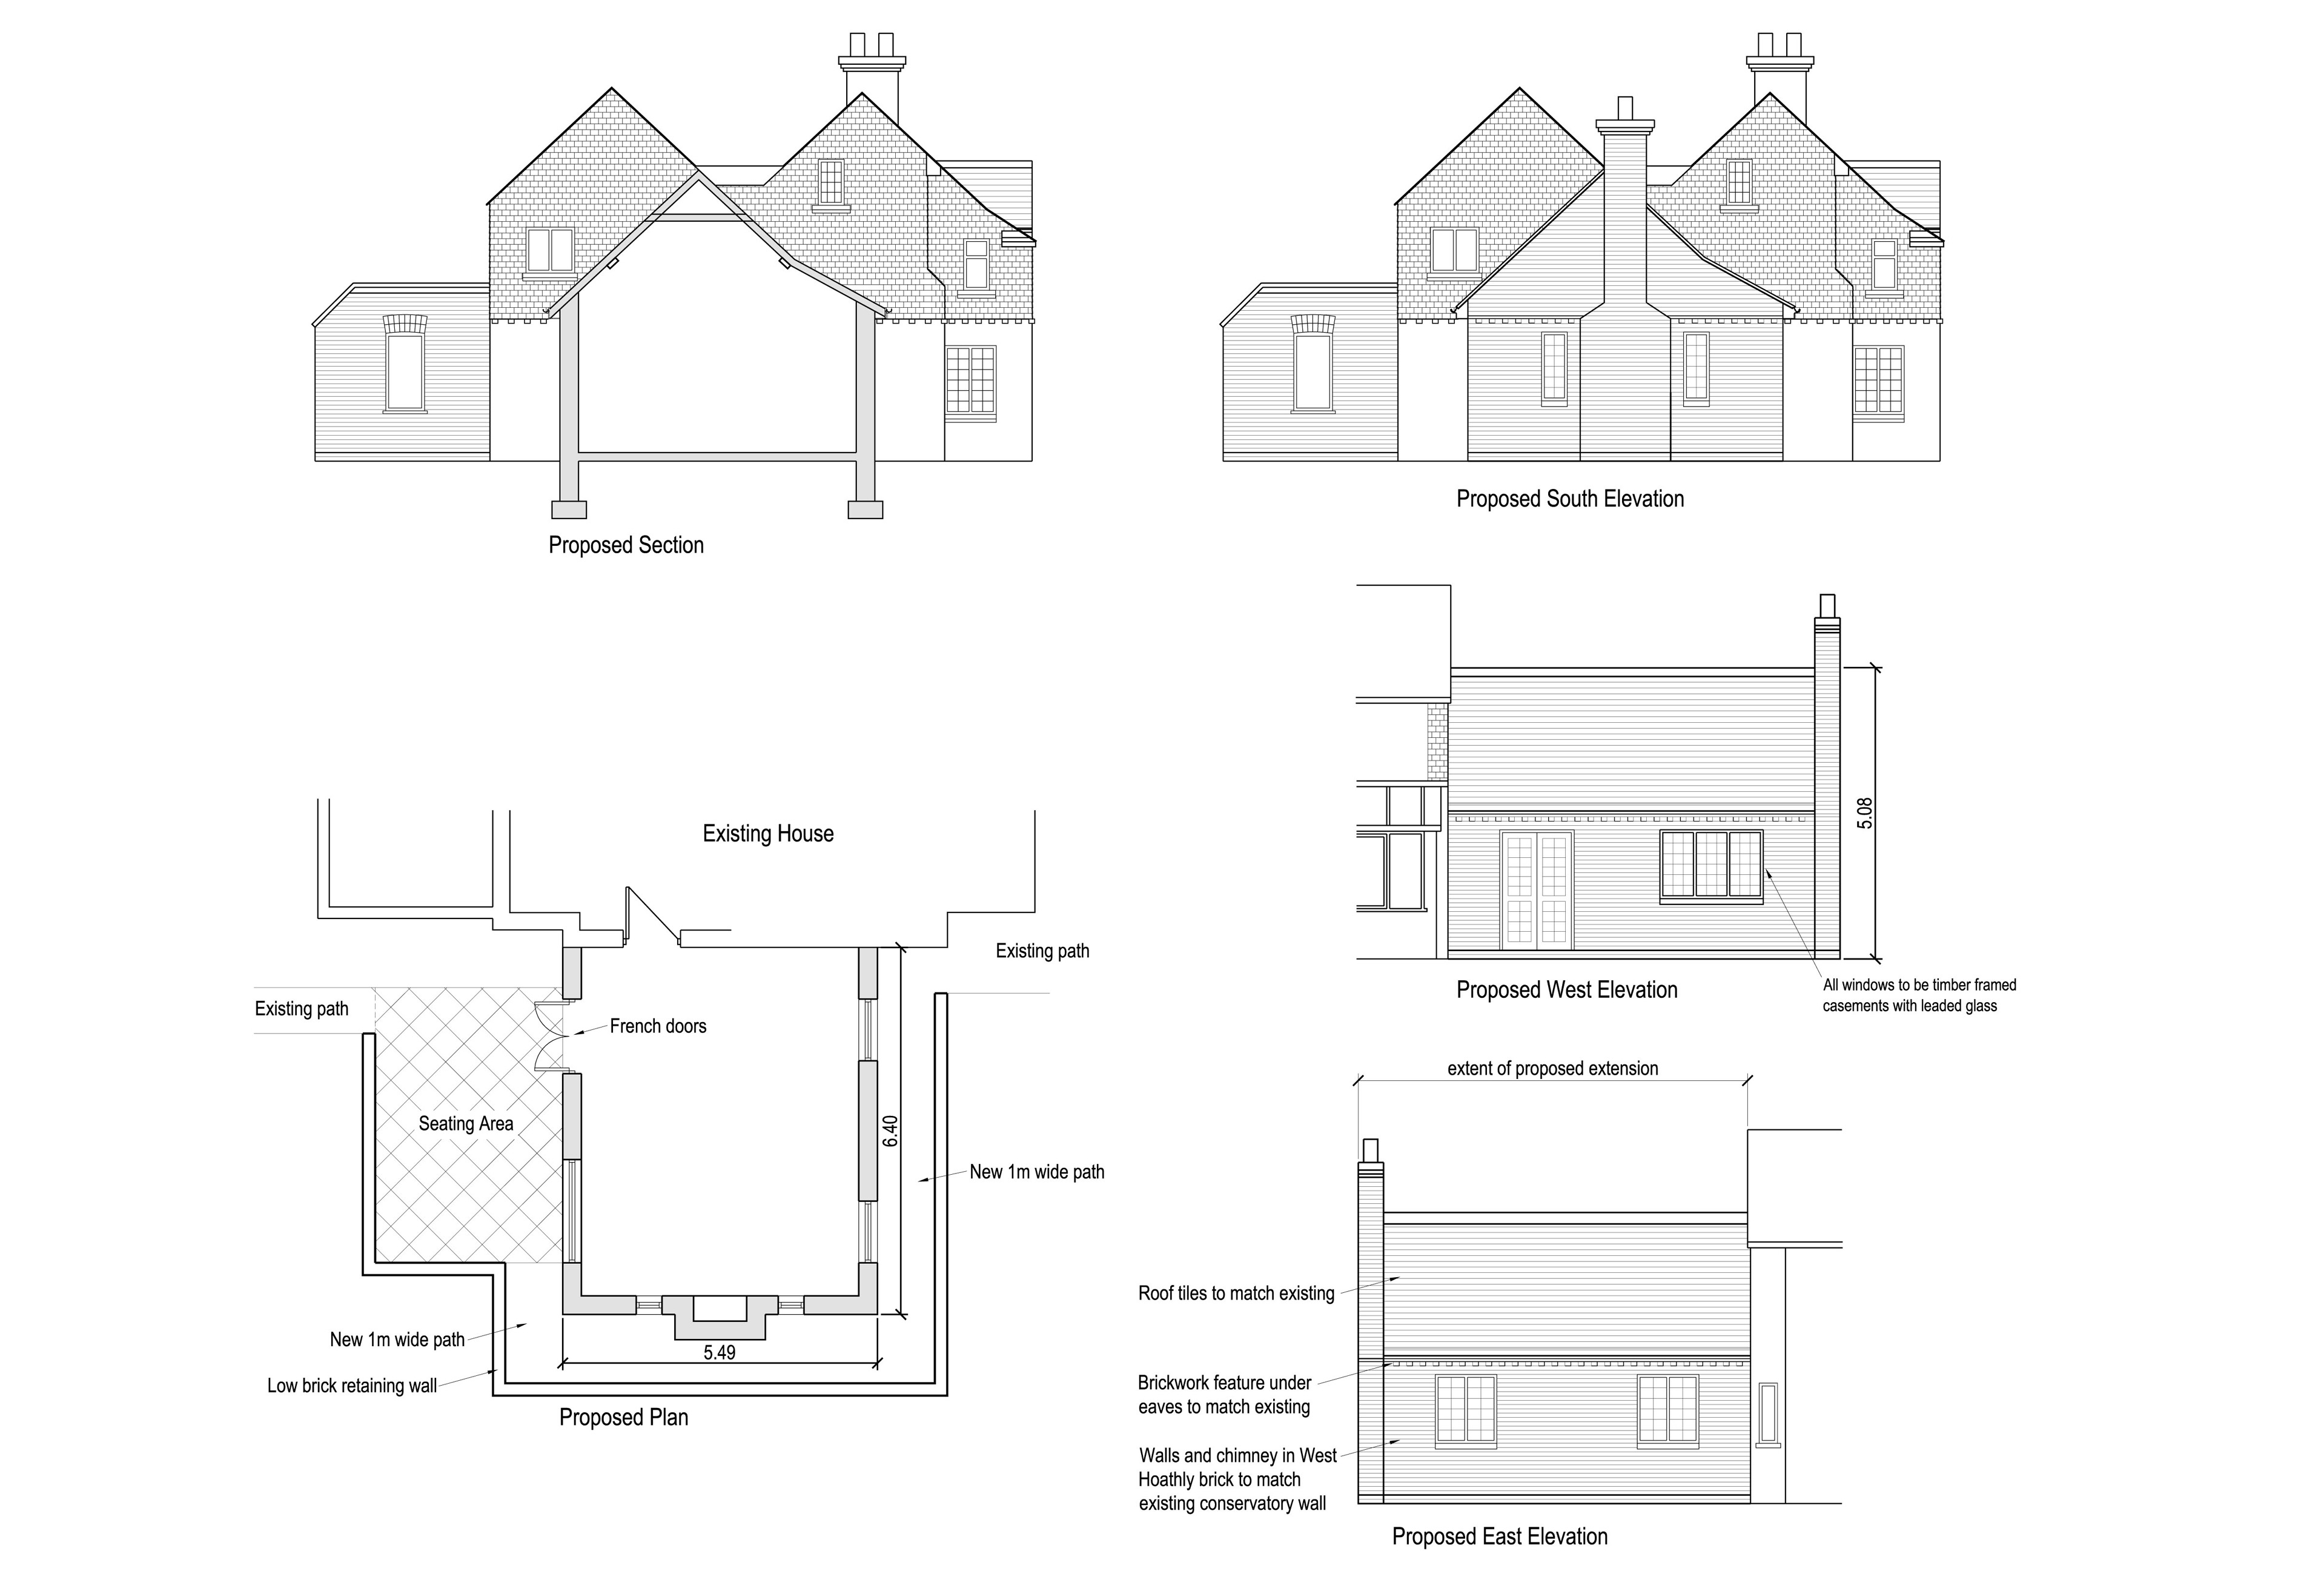 D:BOWERS_COTTAGEBowers_Cottage_Drawings proposed elevs (1)